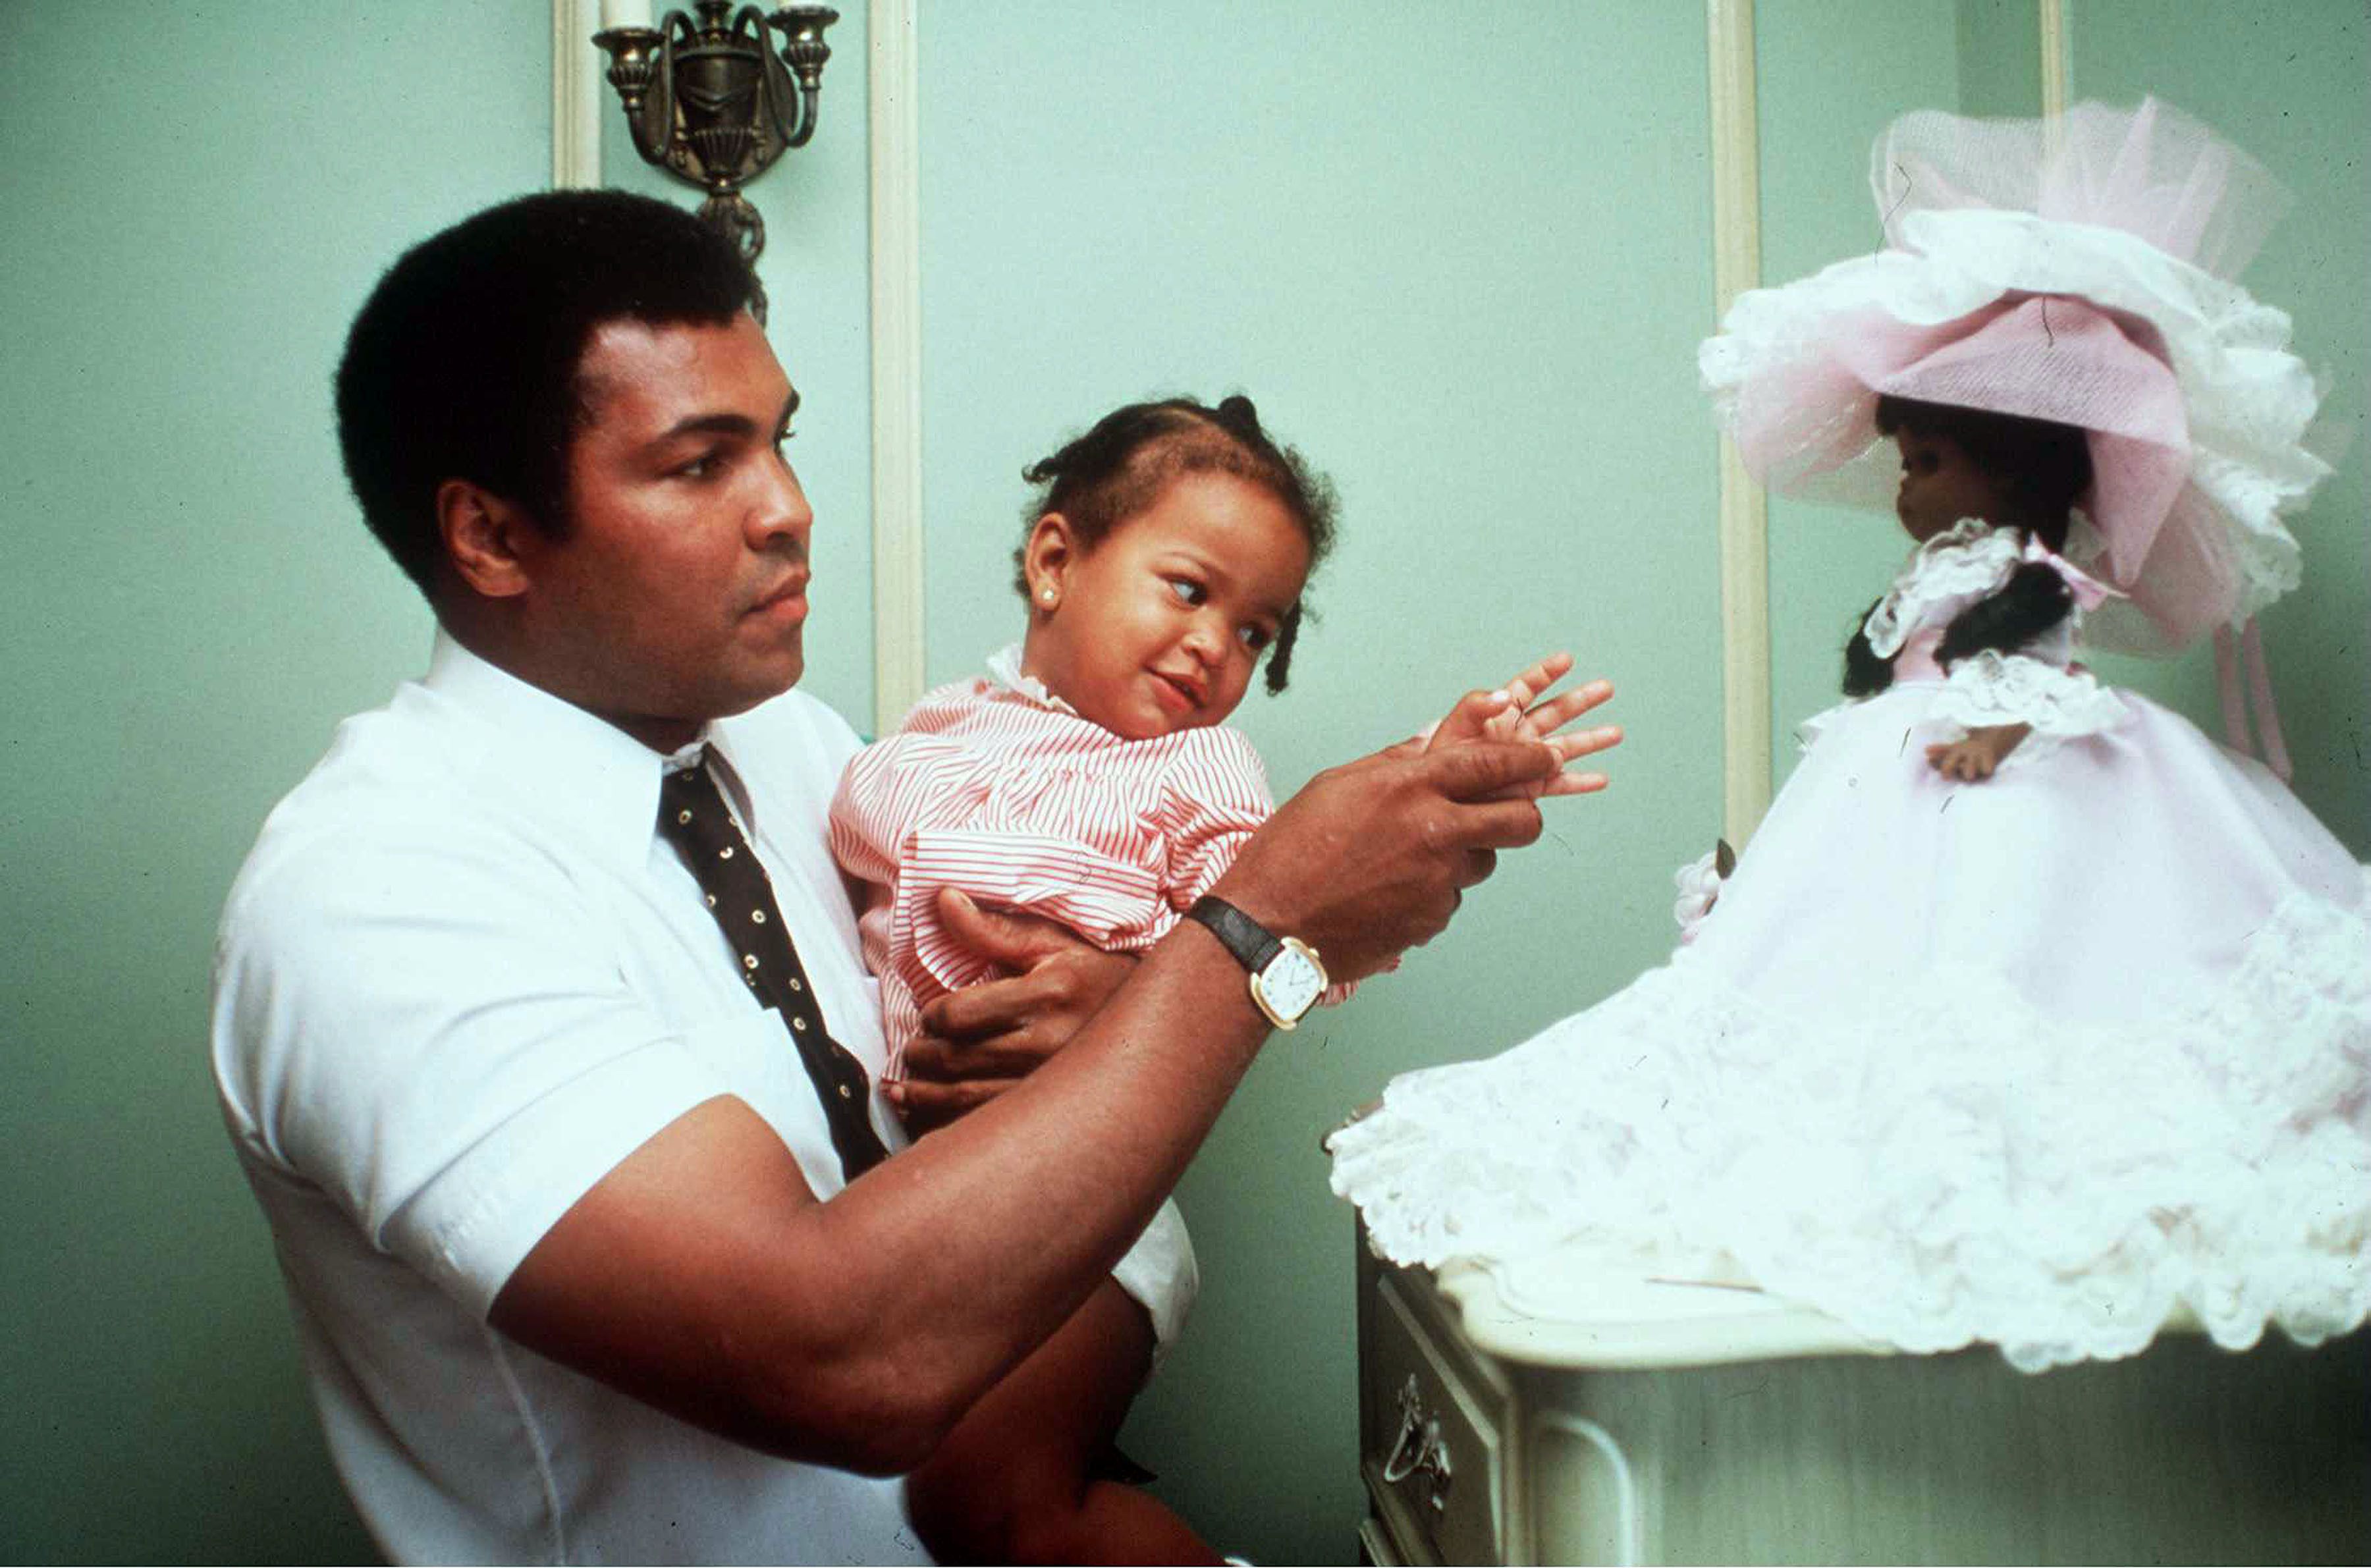 3113 LOS ANGELES CALIFORNIA May 3, 1980 Muhammad Ali with his daughter Laila Ali when she was 2 in his Hancock Park home before his last fight with Larry Holmes wich took place in Las Vegas, 2nd October 1980., Image: 288875235, License: Rights-managed, Restrictions: , Model Release: no, Credit line: Profimedia, Pacific coast news